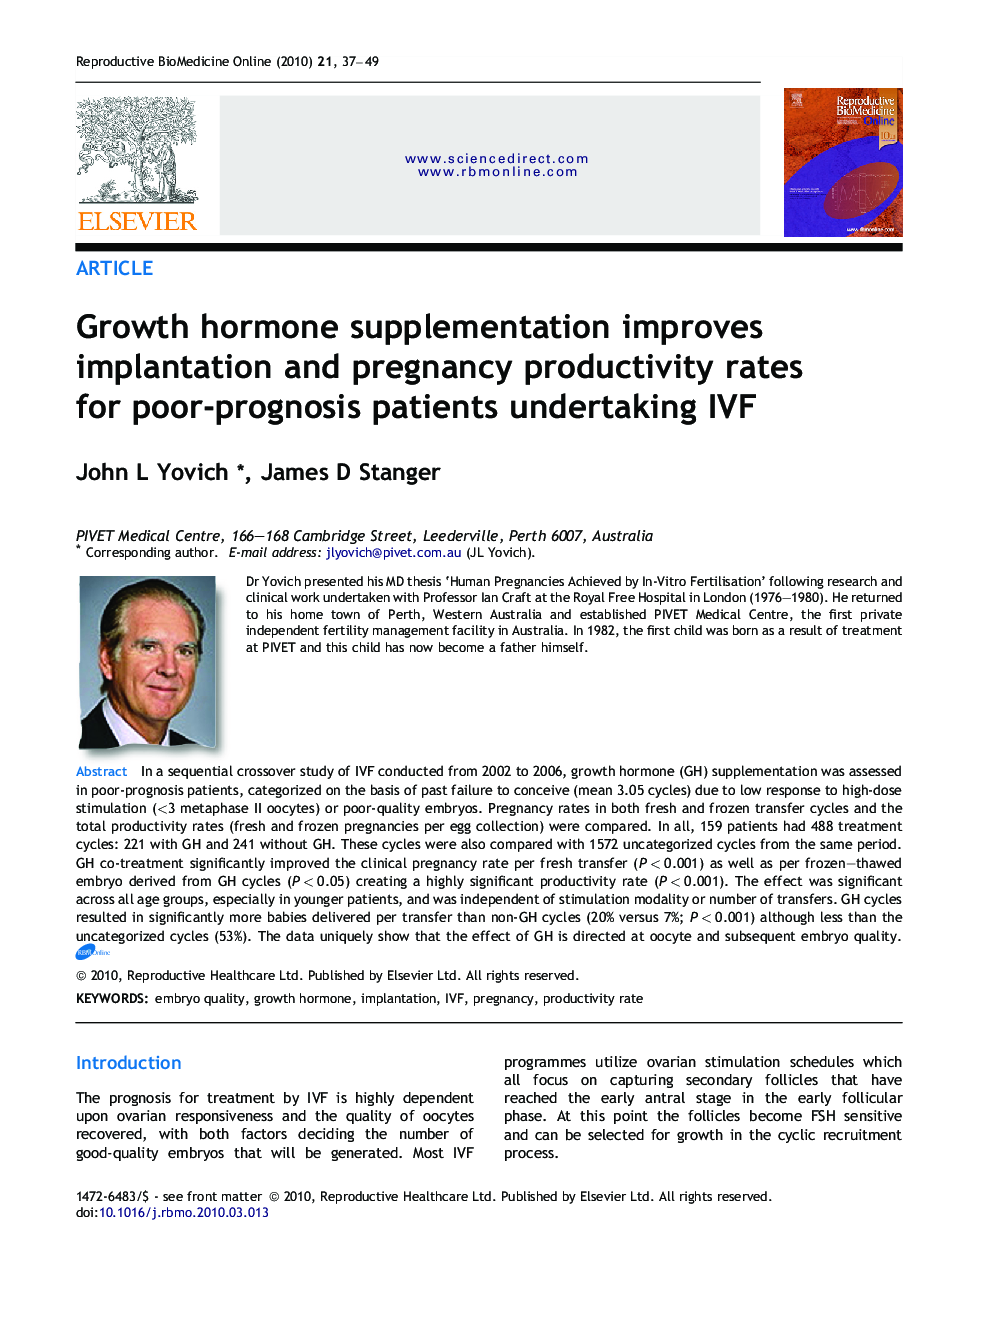 Growth hormone supplementation improves implantation and pregnancy productivity rates for poor-prognosis patients undertaking IVF 